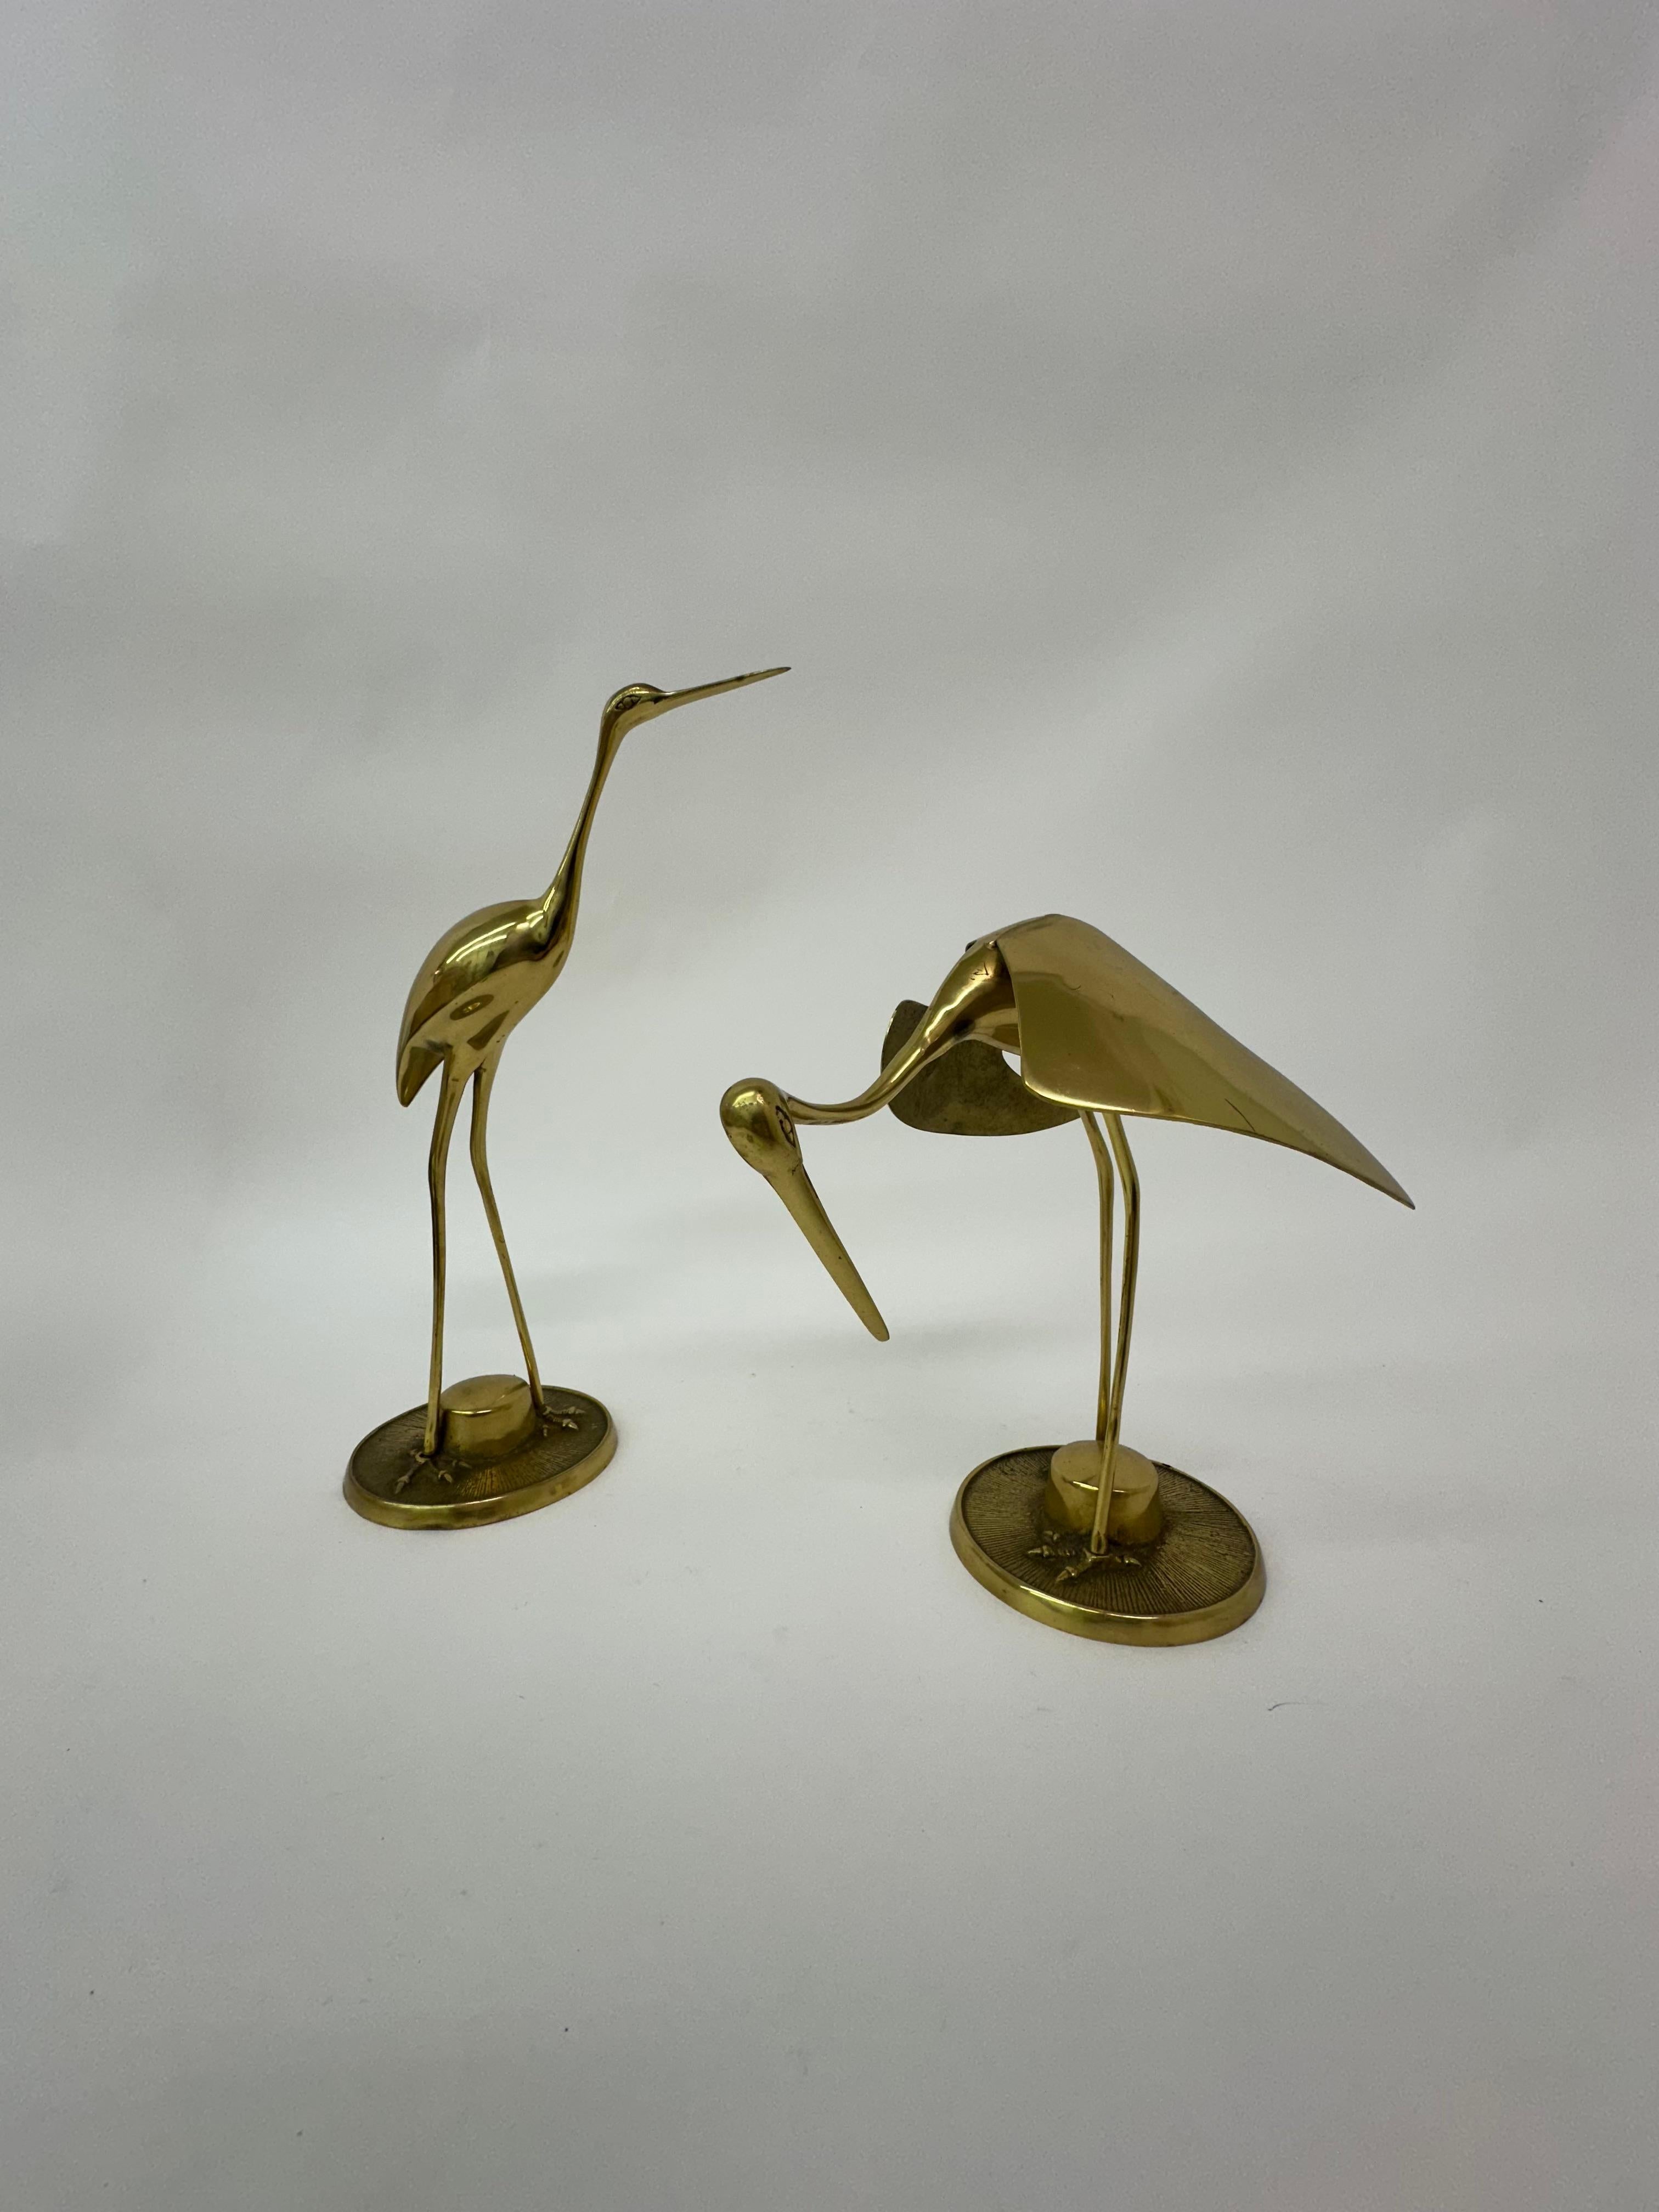 Dimensions: 38,5cm H , 24cm W, 14 cm D and 28cm H, 27,5cm W, 17,5cm W
Condition: Good
Material: Brass
Color: Gold
Period: 1970’s